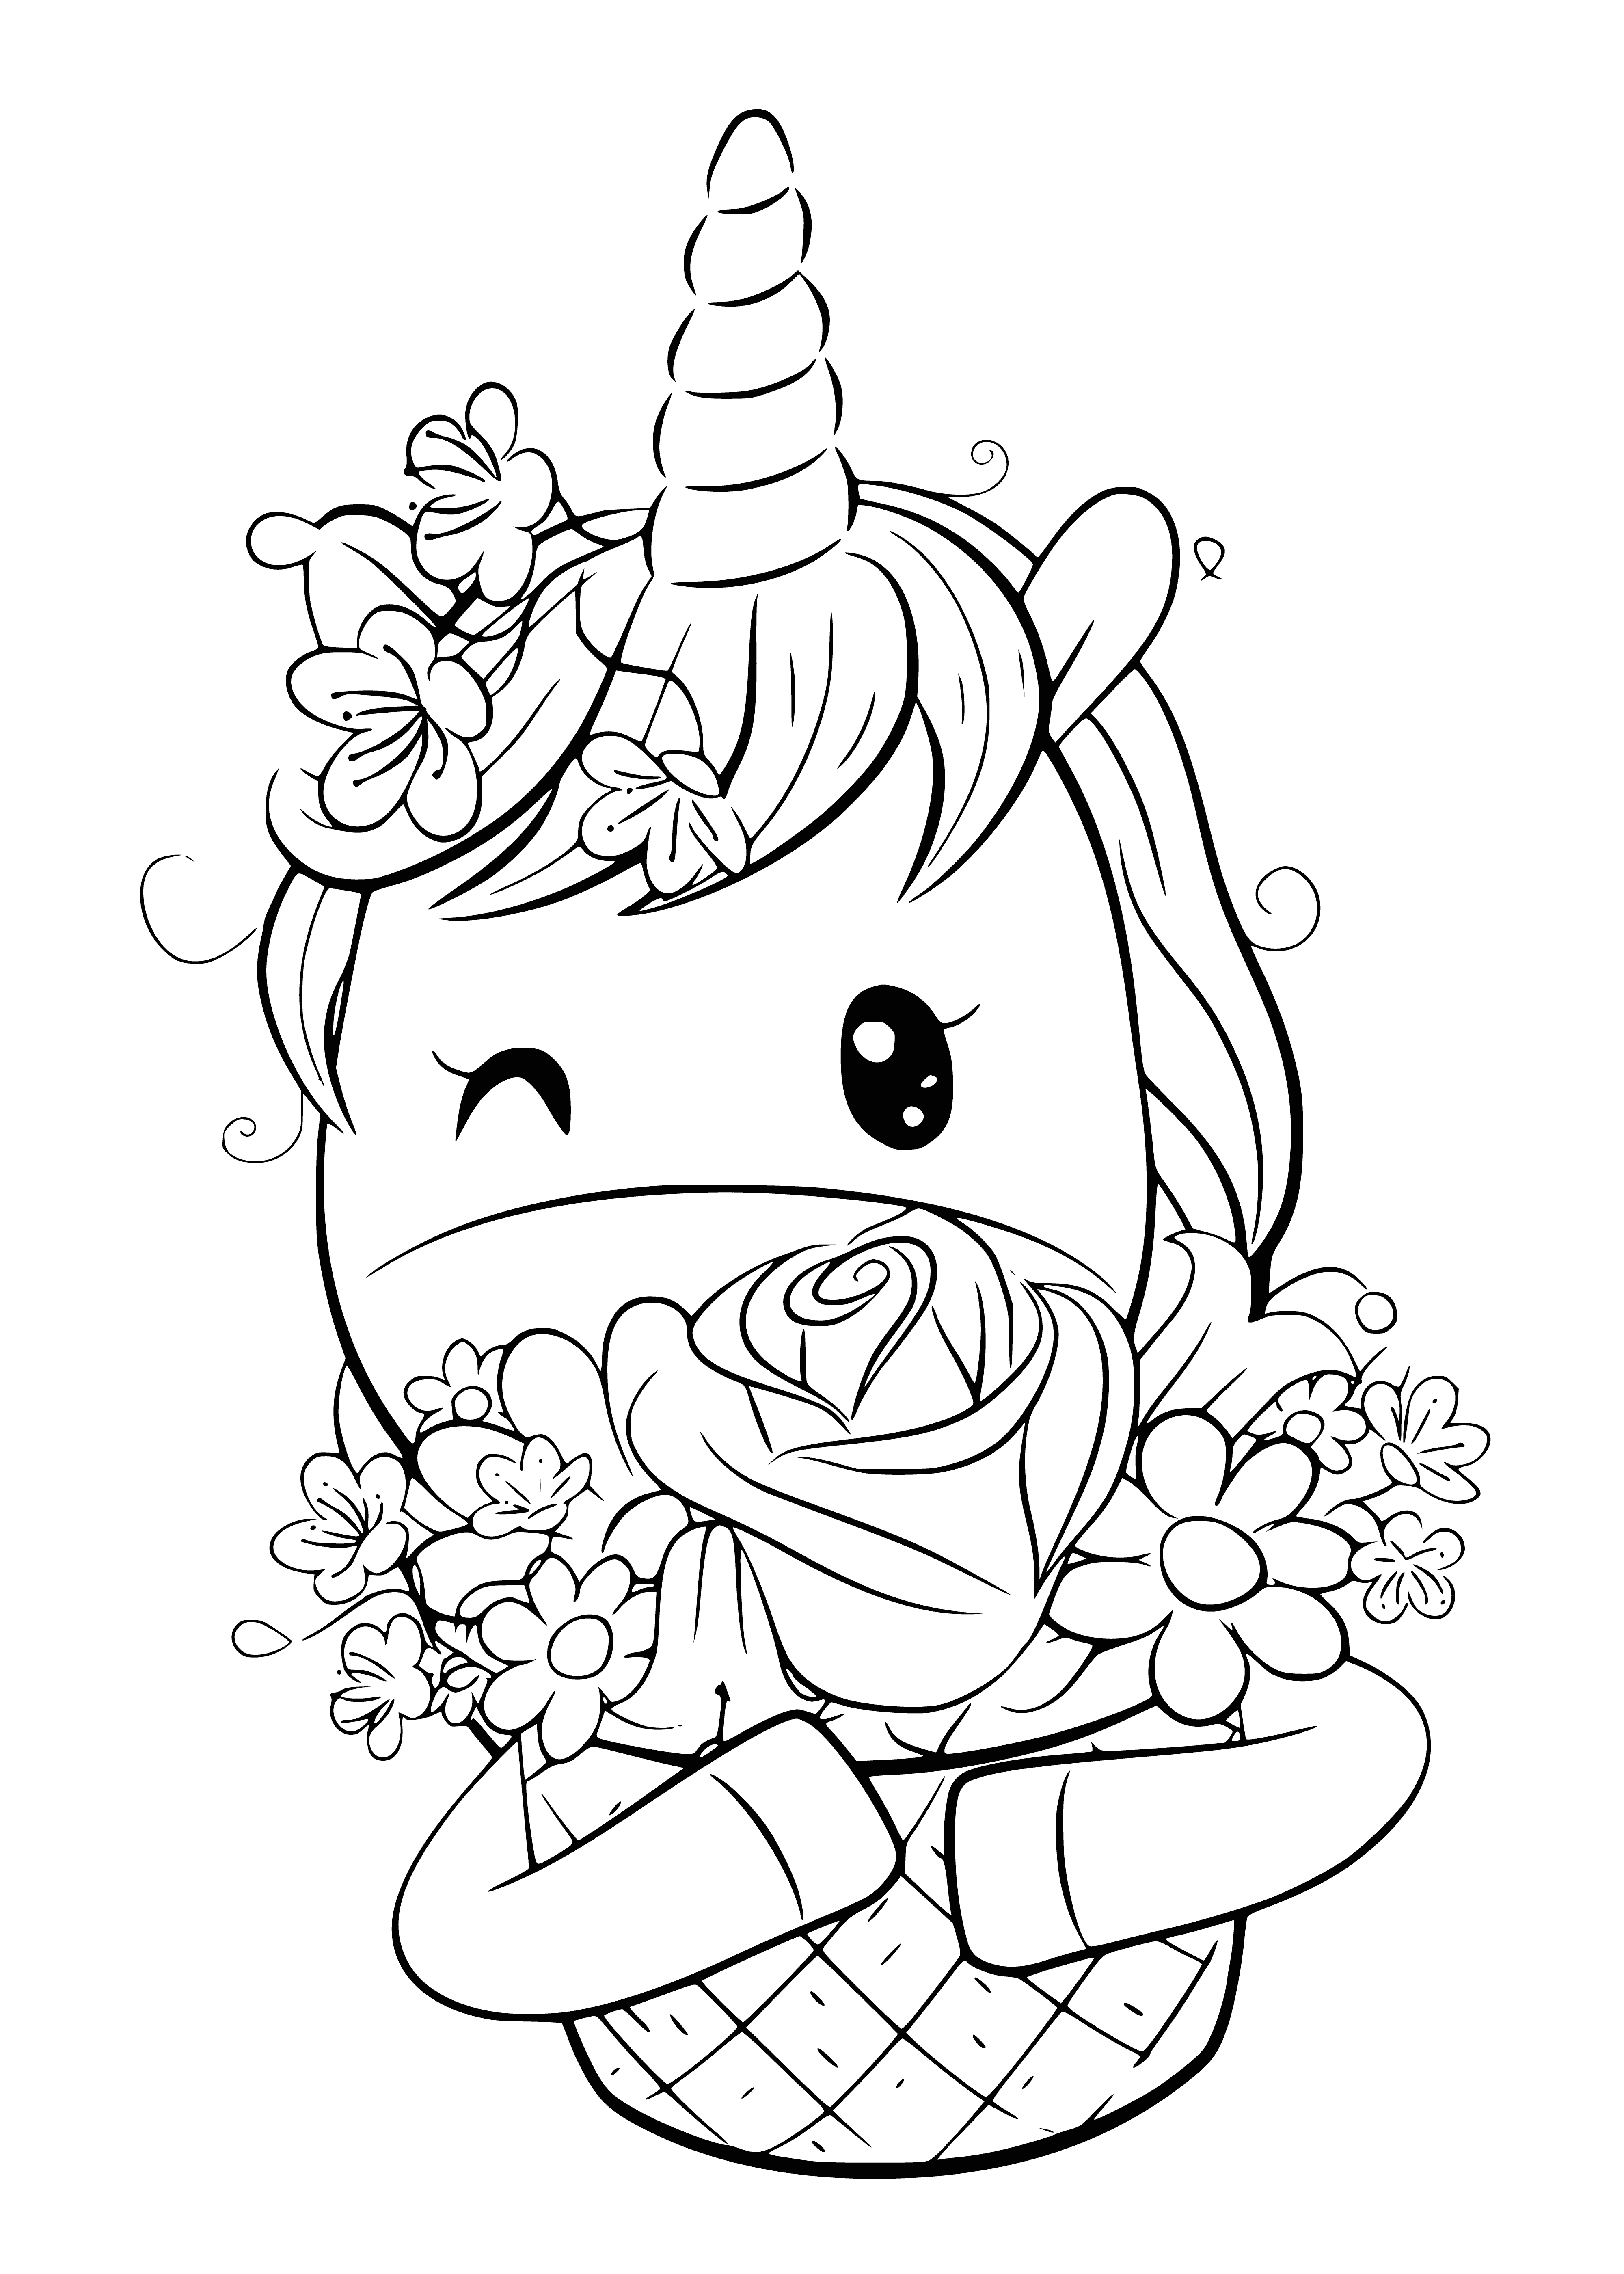 coloring page: Unicorn w/flowers in hair standing on hill w/ rainbow in bg.